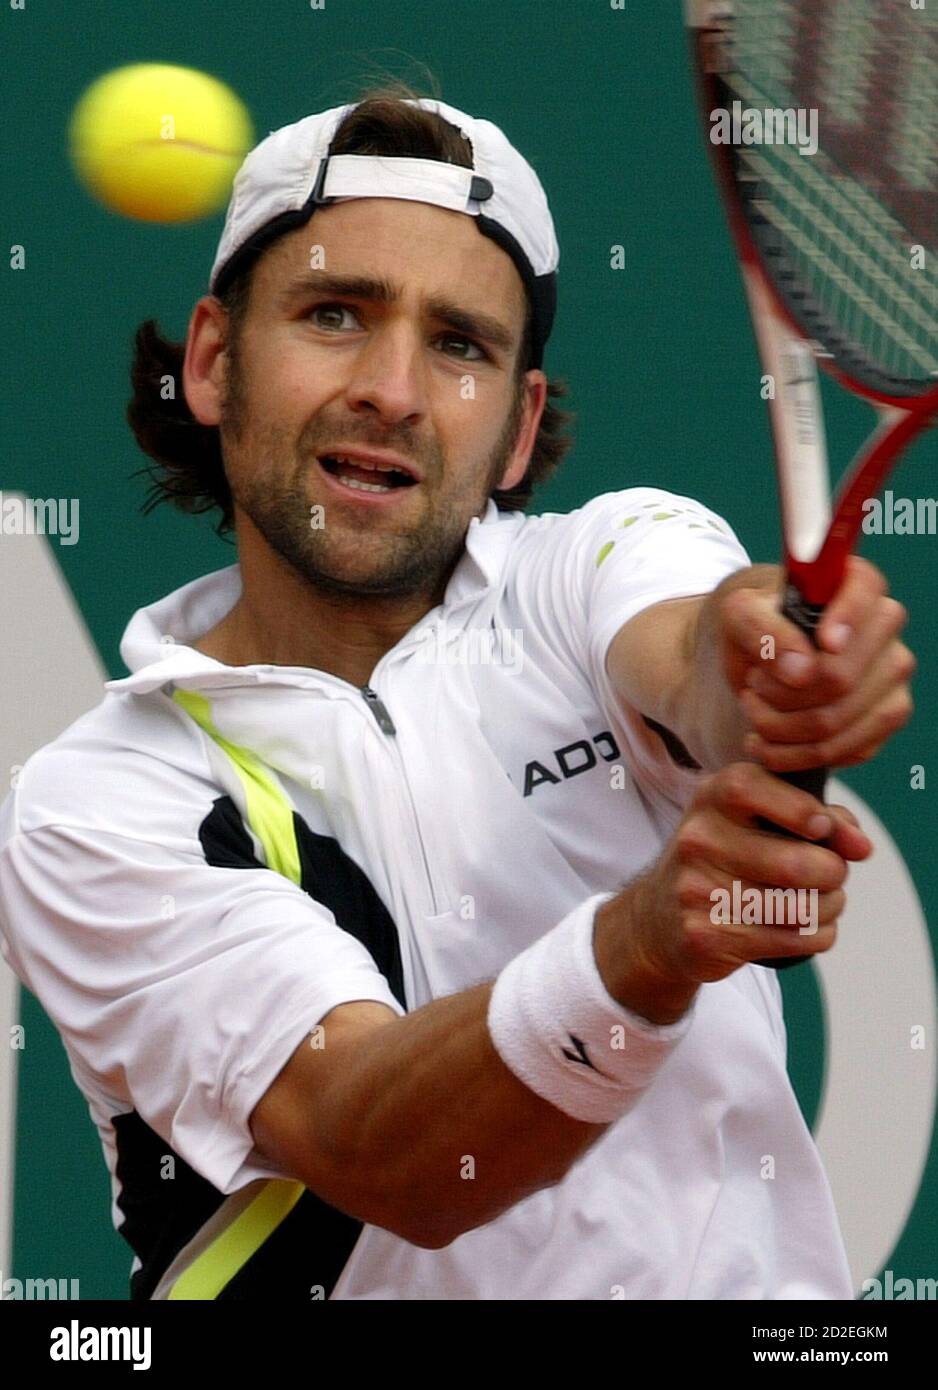 Nicolas Kiefer of Germany hits a returns during his Monte Carlo tennis open  match against Max Mirnyi of Belarus in Monaco April 17, 2006.  REUTERS/Pascal Deschamps Stock Photo - Alamy